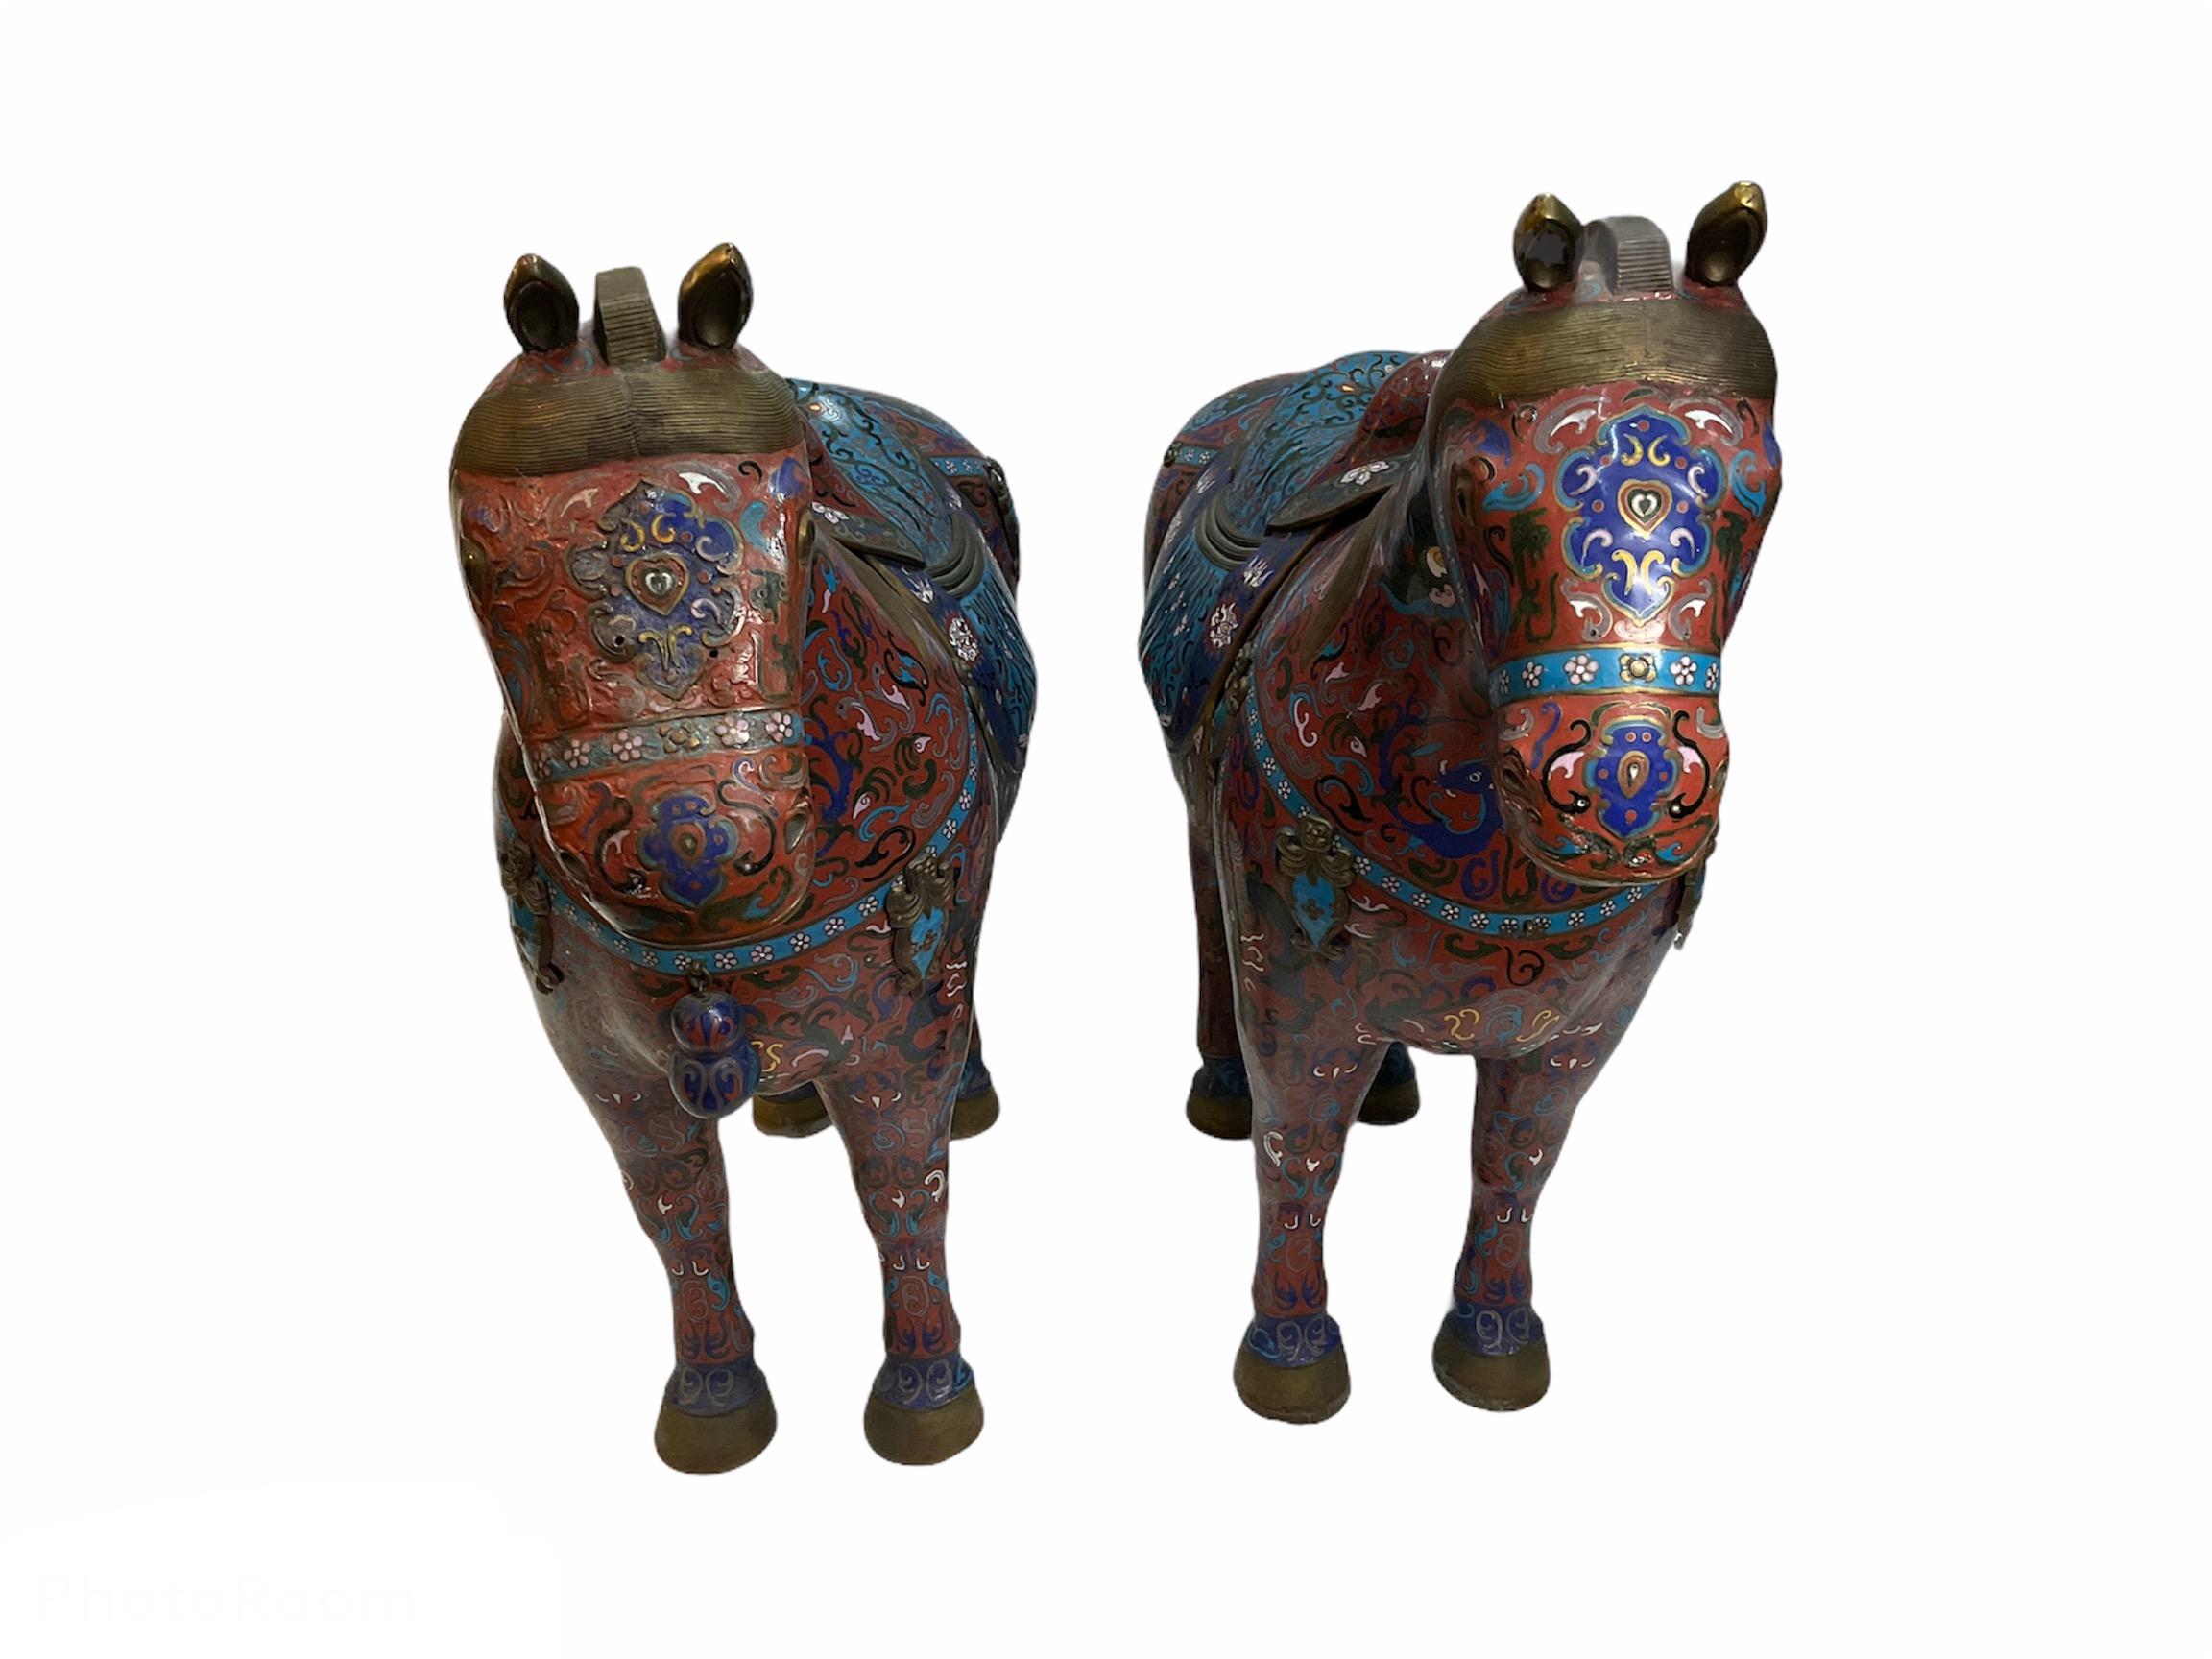 20th Century Pair of Chinese Polychromatic Enamel Cloisonné Brass Horse Sculptures